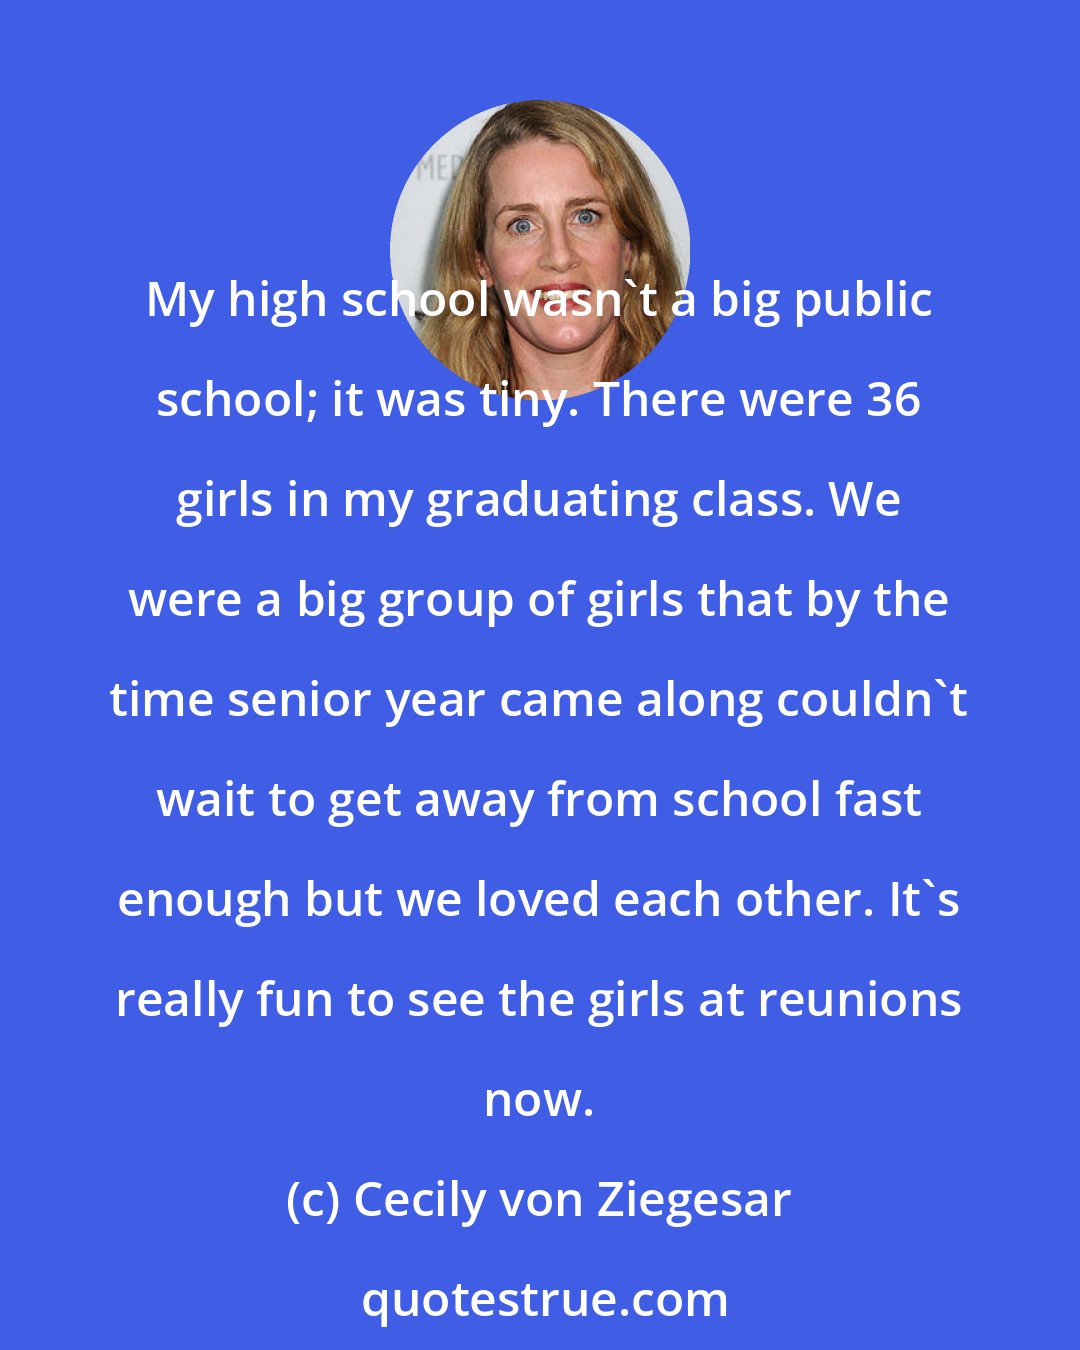 Cecily von Ziegesar: My high school wasn't a big public school; it was tiny. There were 36 girls in my graduating class. We were a big group of girls that by the time senior year came along couldn't wait to get away from school fast enough but we loved each other. It's really fun to see the girls at reunions now.